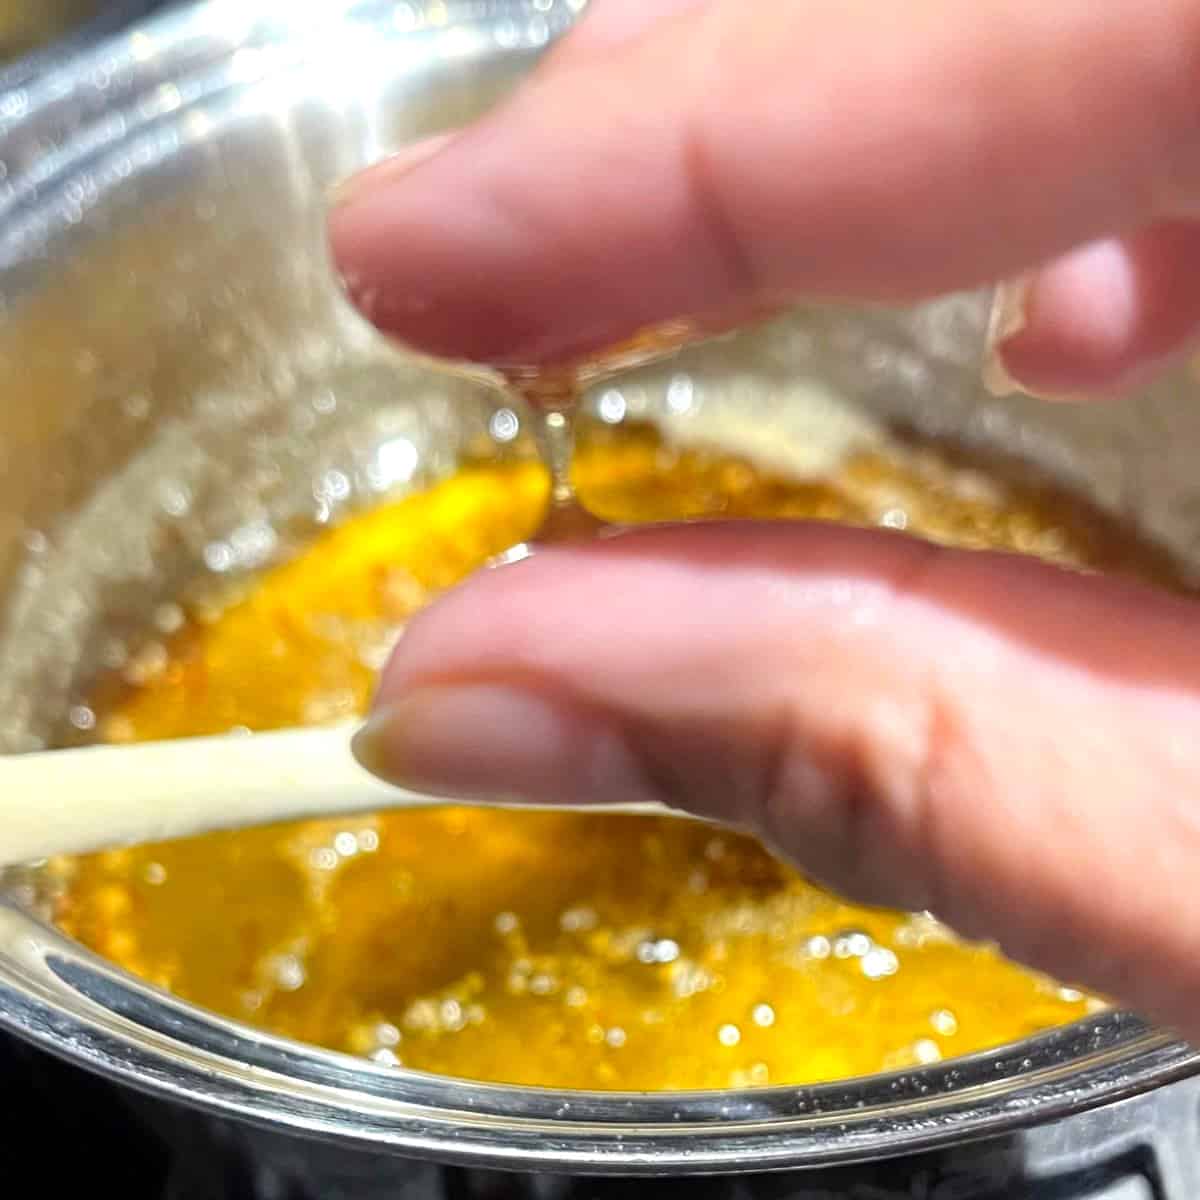 Two fingers showing one-string consistency of sugar syrup.